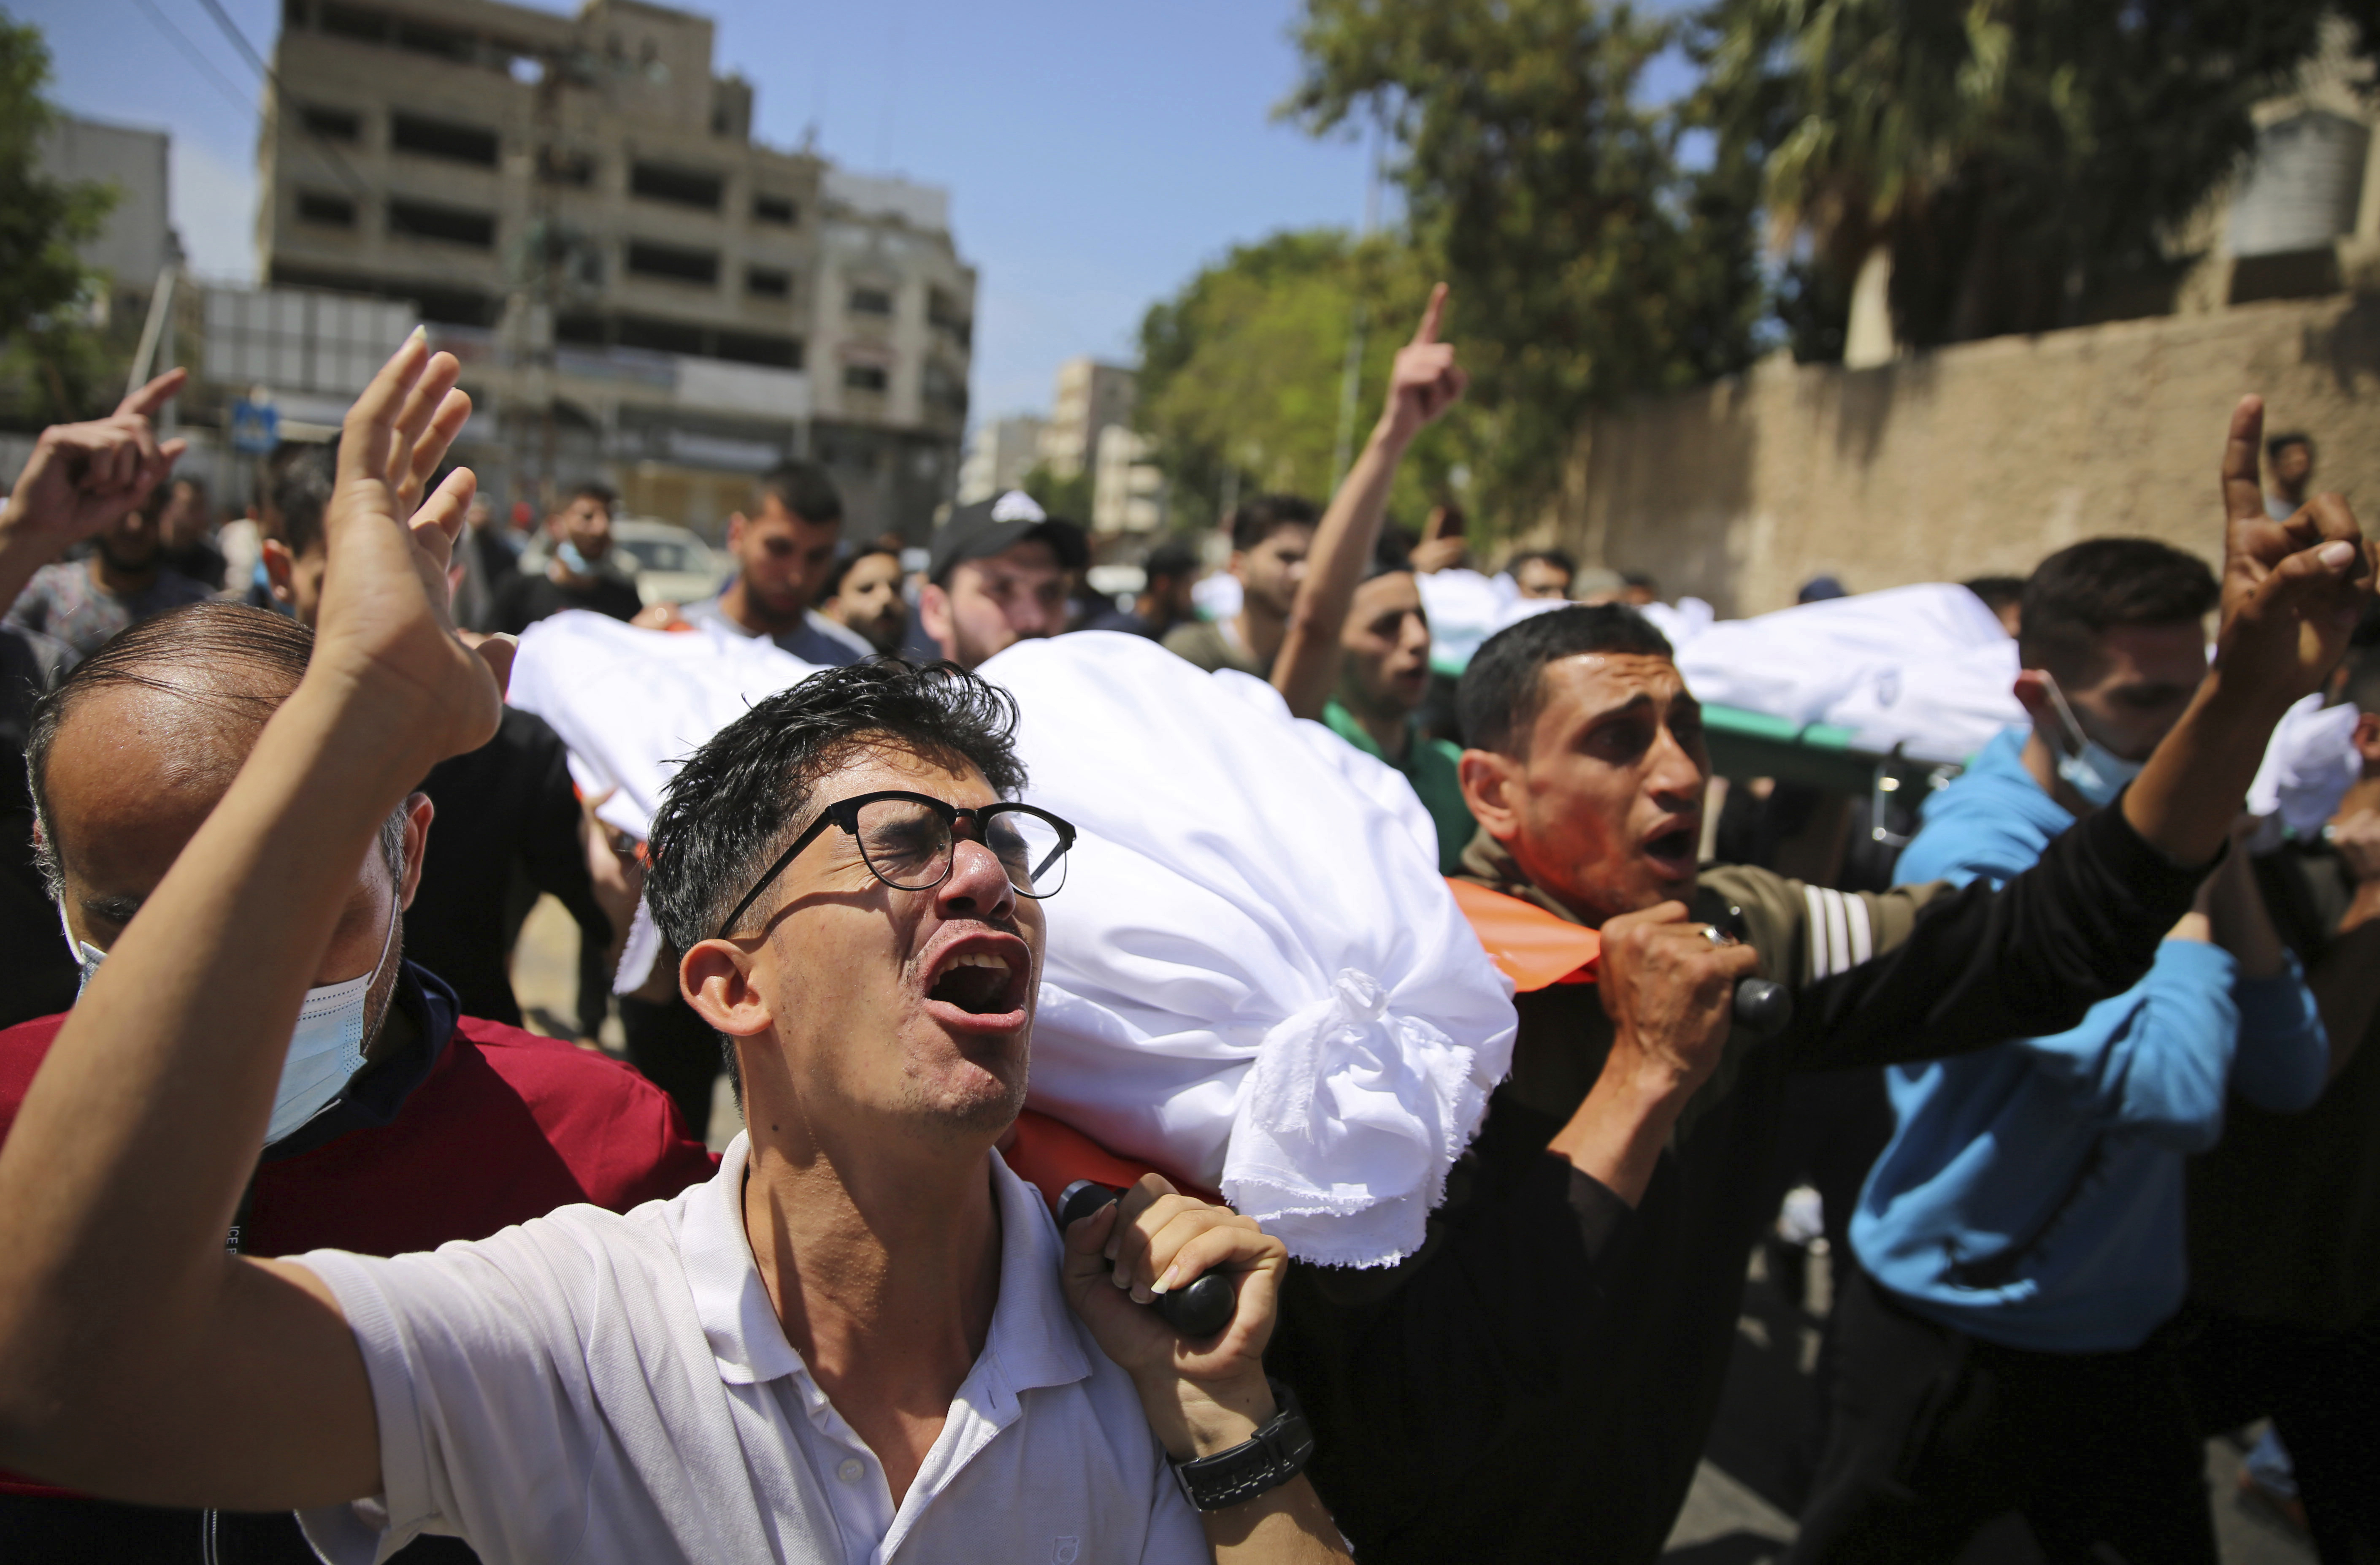 Mourners carry the the bodies of Palestinians who were killed in overnight Israeli airstrikes that hit their homes, during their funeral in Gaza City, Sunday, May 16, 2021. (AP Photo/Abdel Kareem Hana)